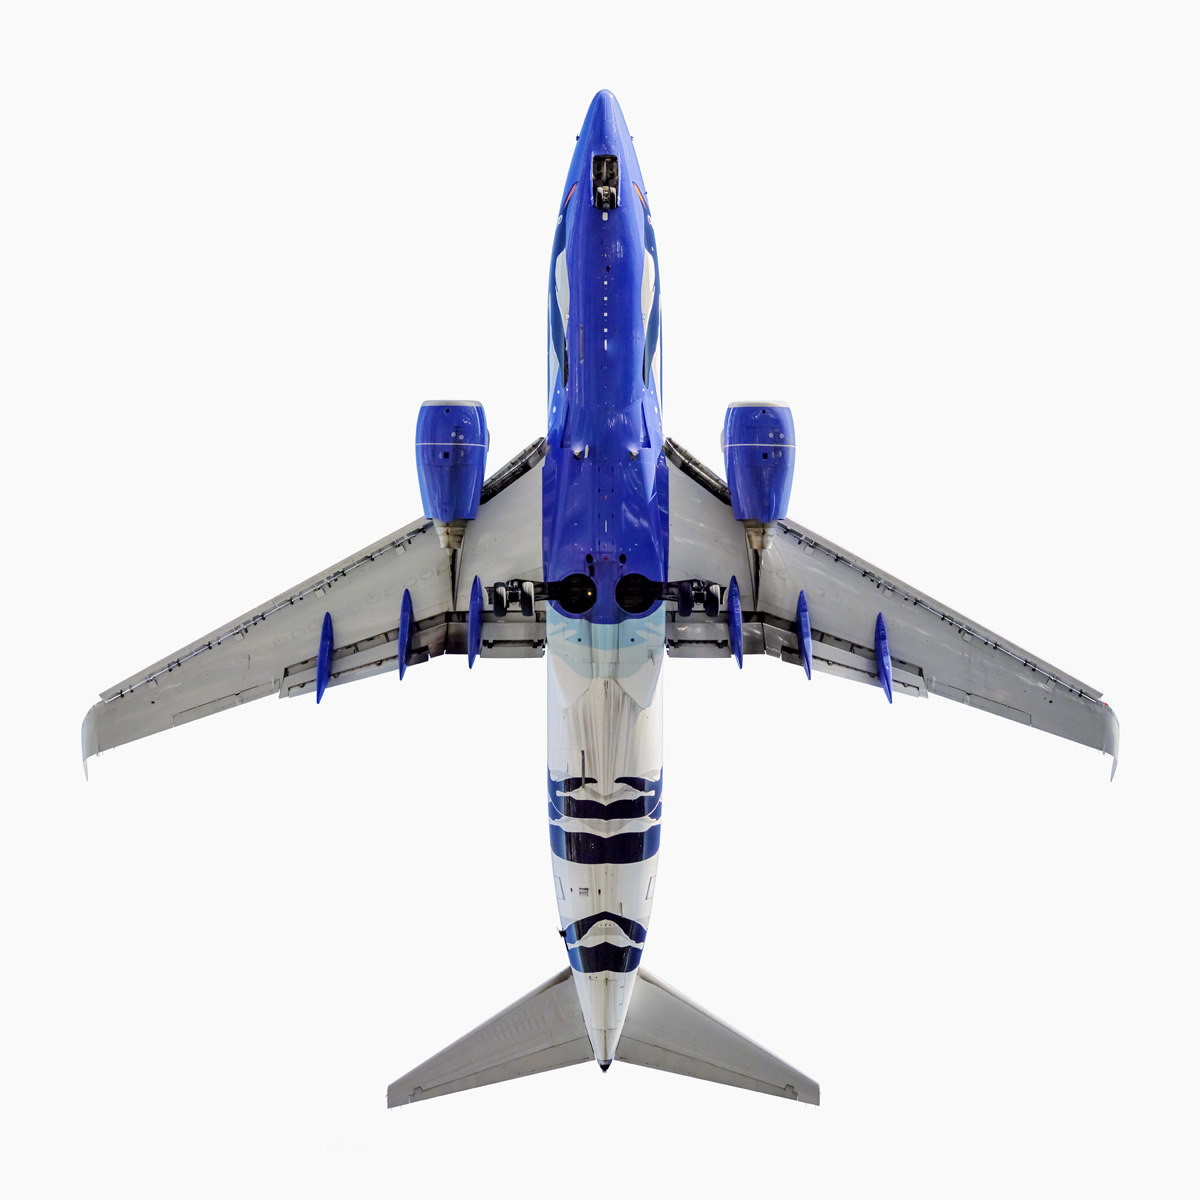 Southwest Airlines Penguin One Boeing 737-700